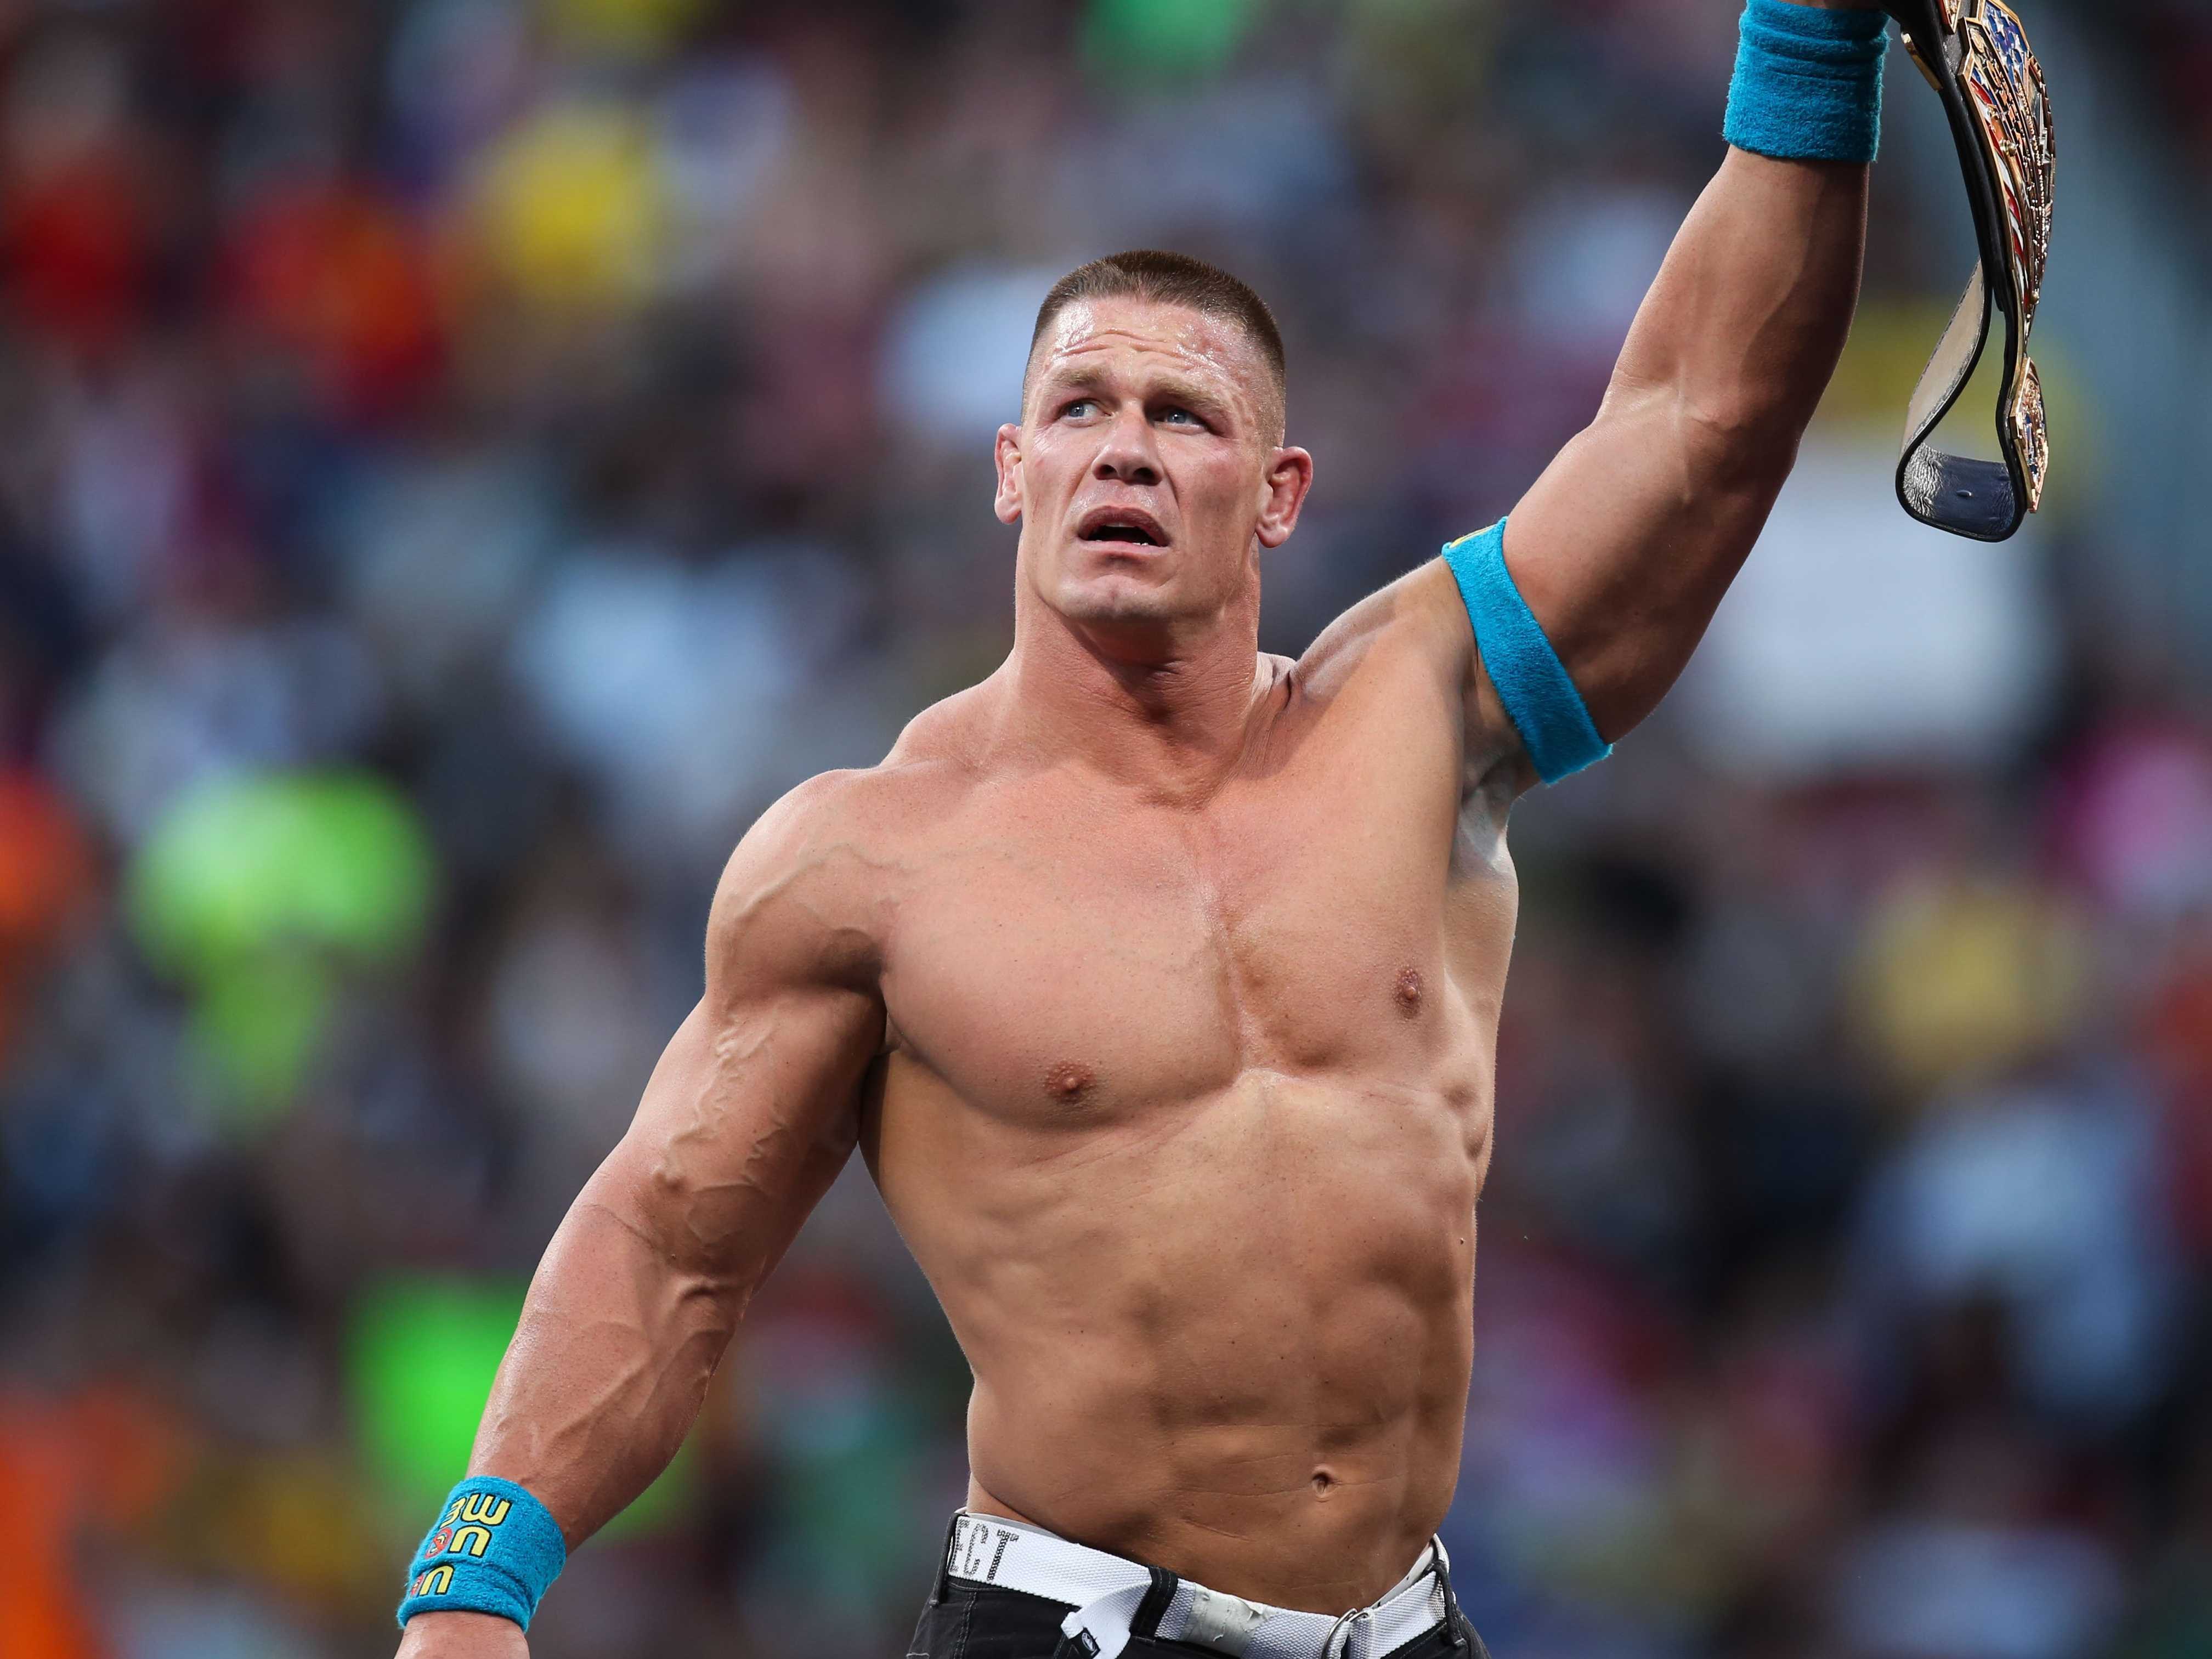 Widescreen For Wwe John Cena Wallpapers Hd 2018 Image Pics Androids.